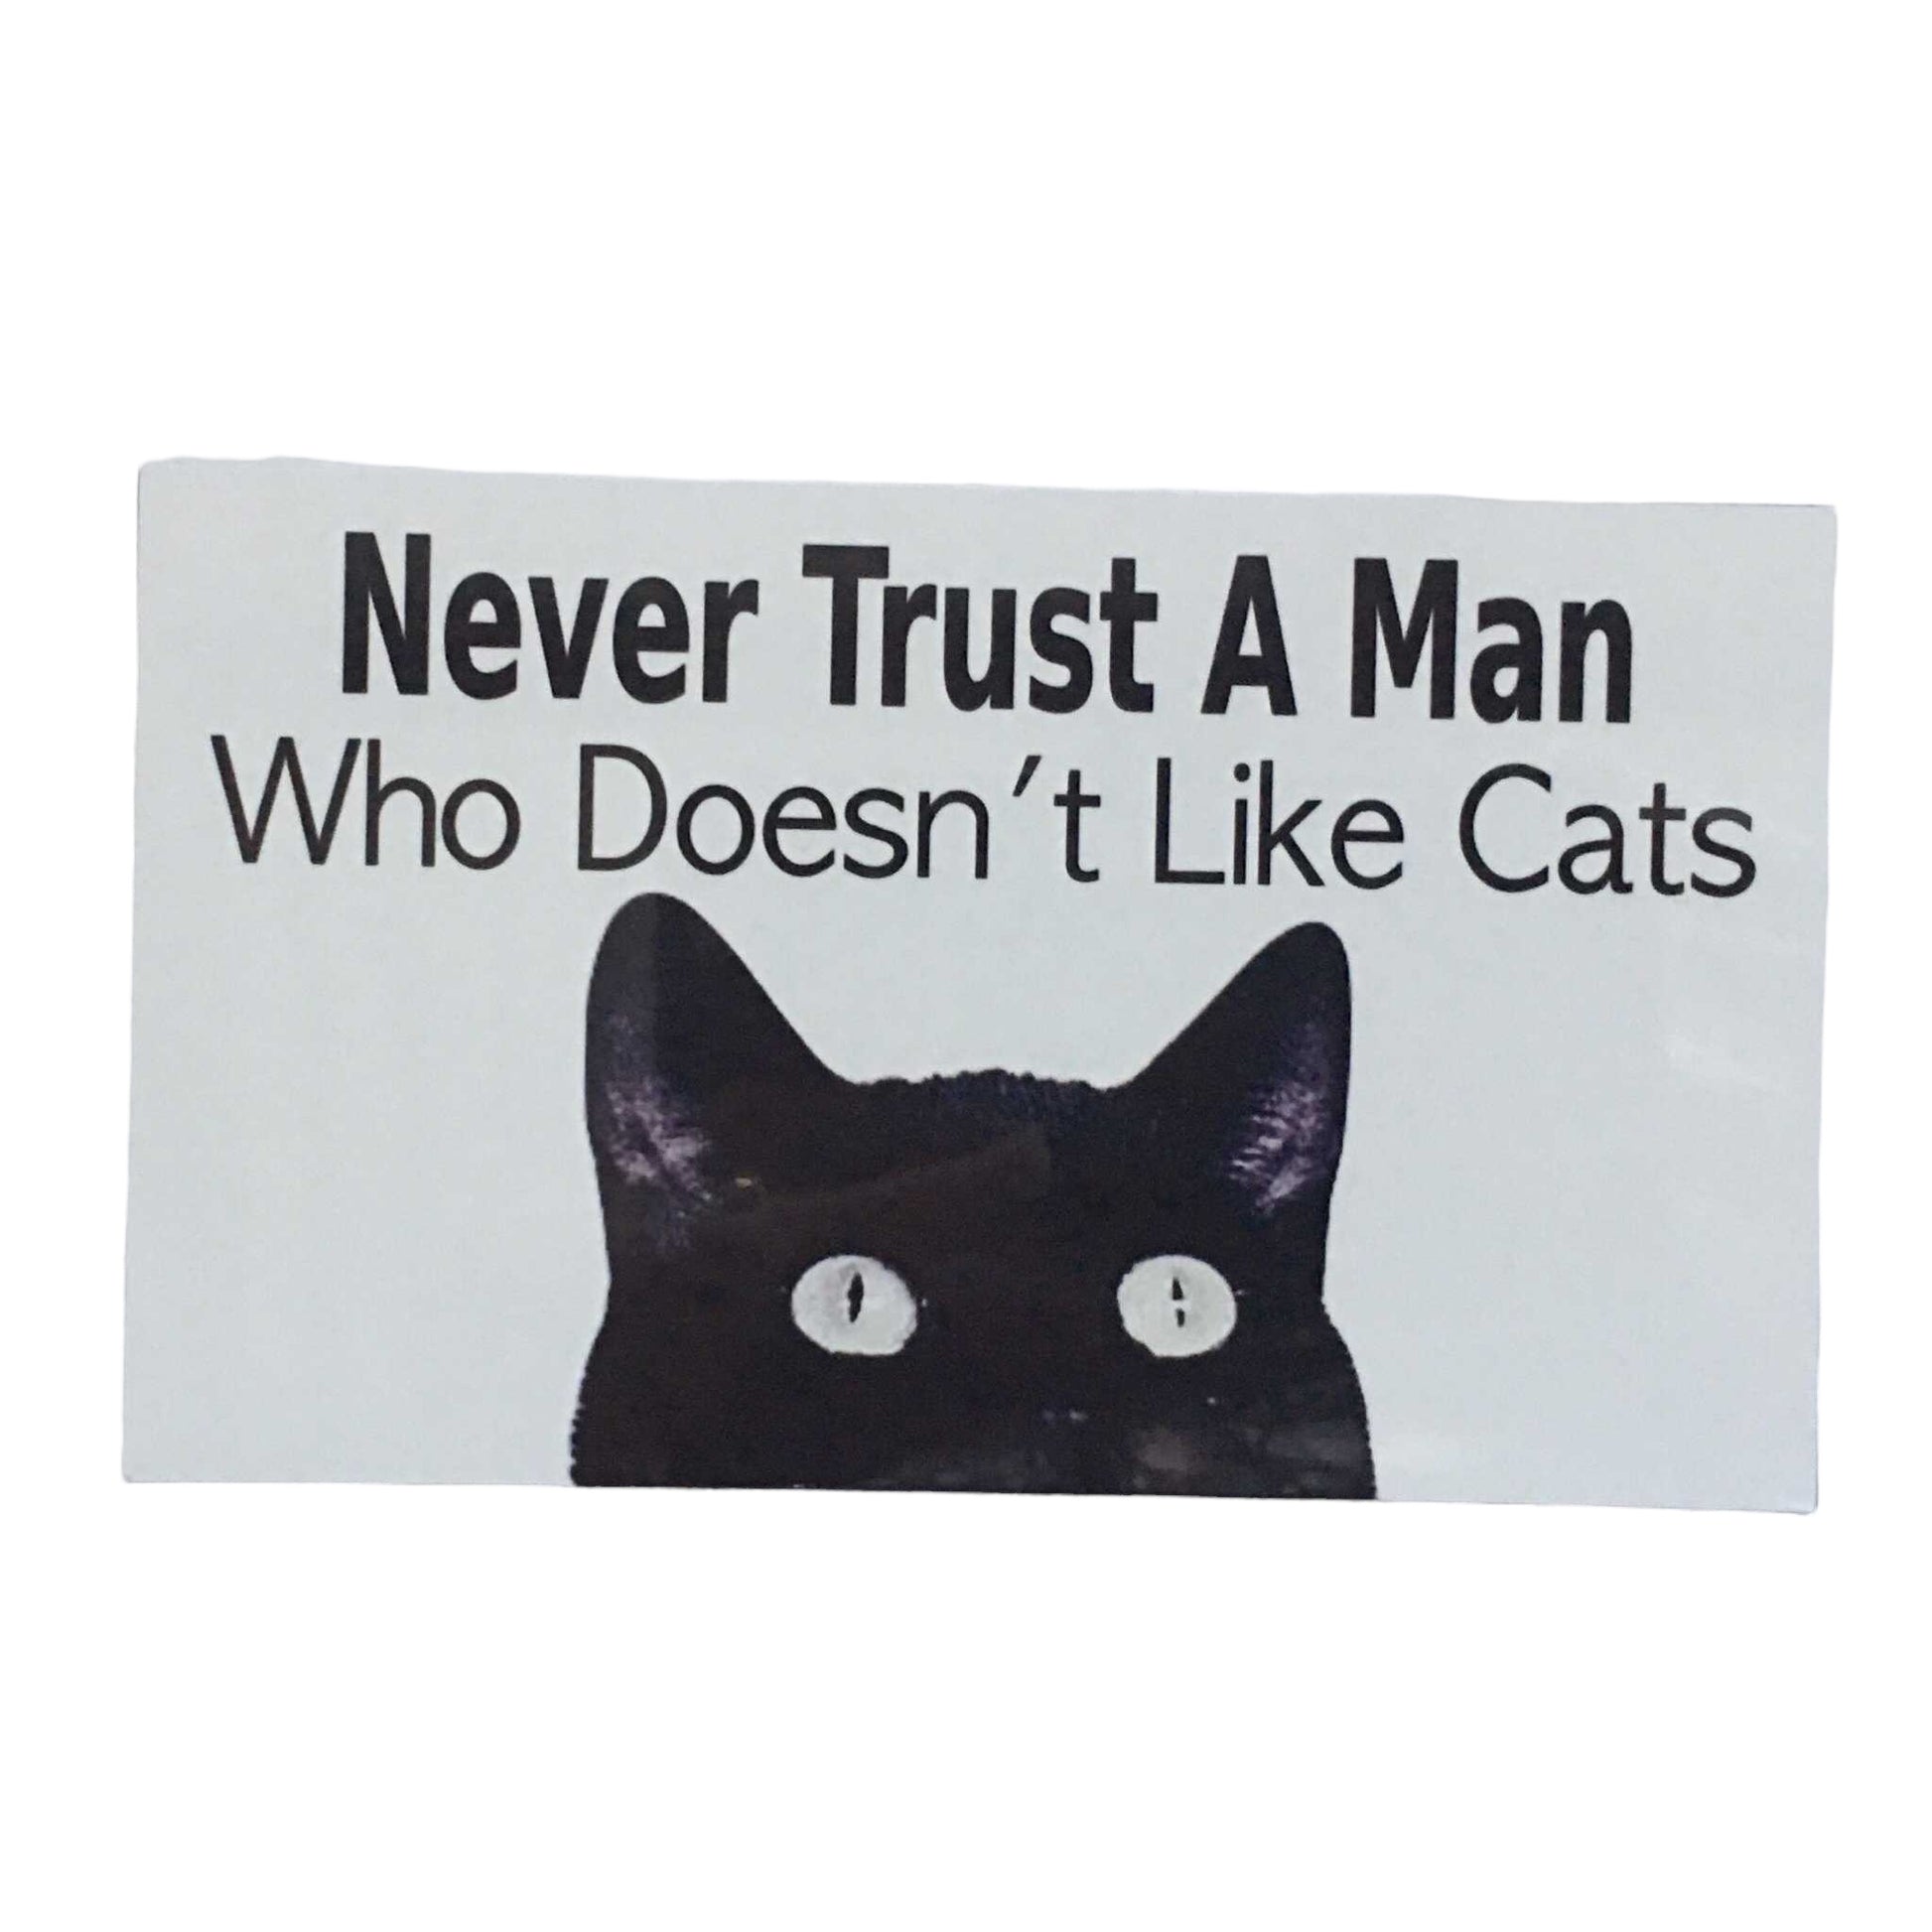 Never Trust A Man Who Doesn’t Like Cats Sign - The Renmy Store Homewares & Gifts 